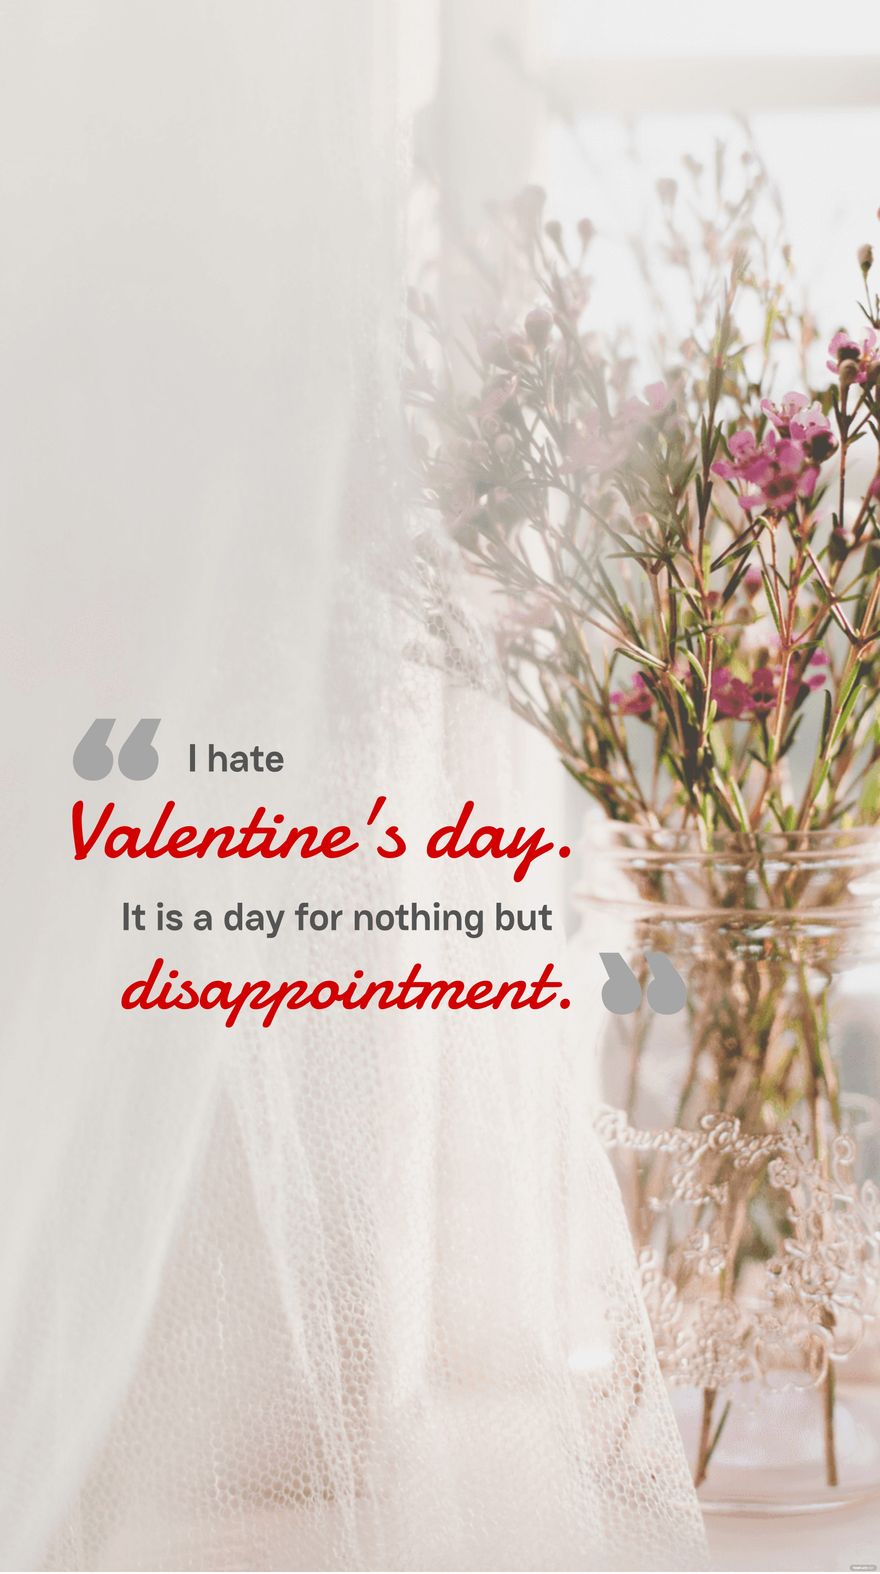 Free Larisa Oleynik - I hate Valentine's day. It is a day for nothing but disappointment.